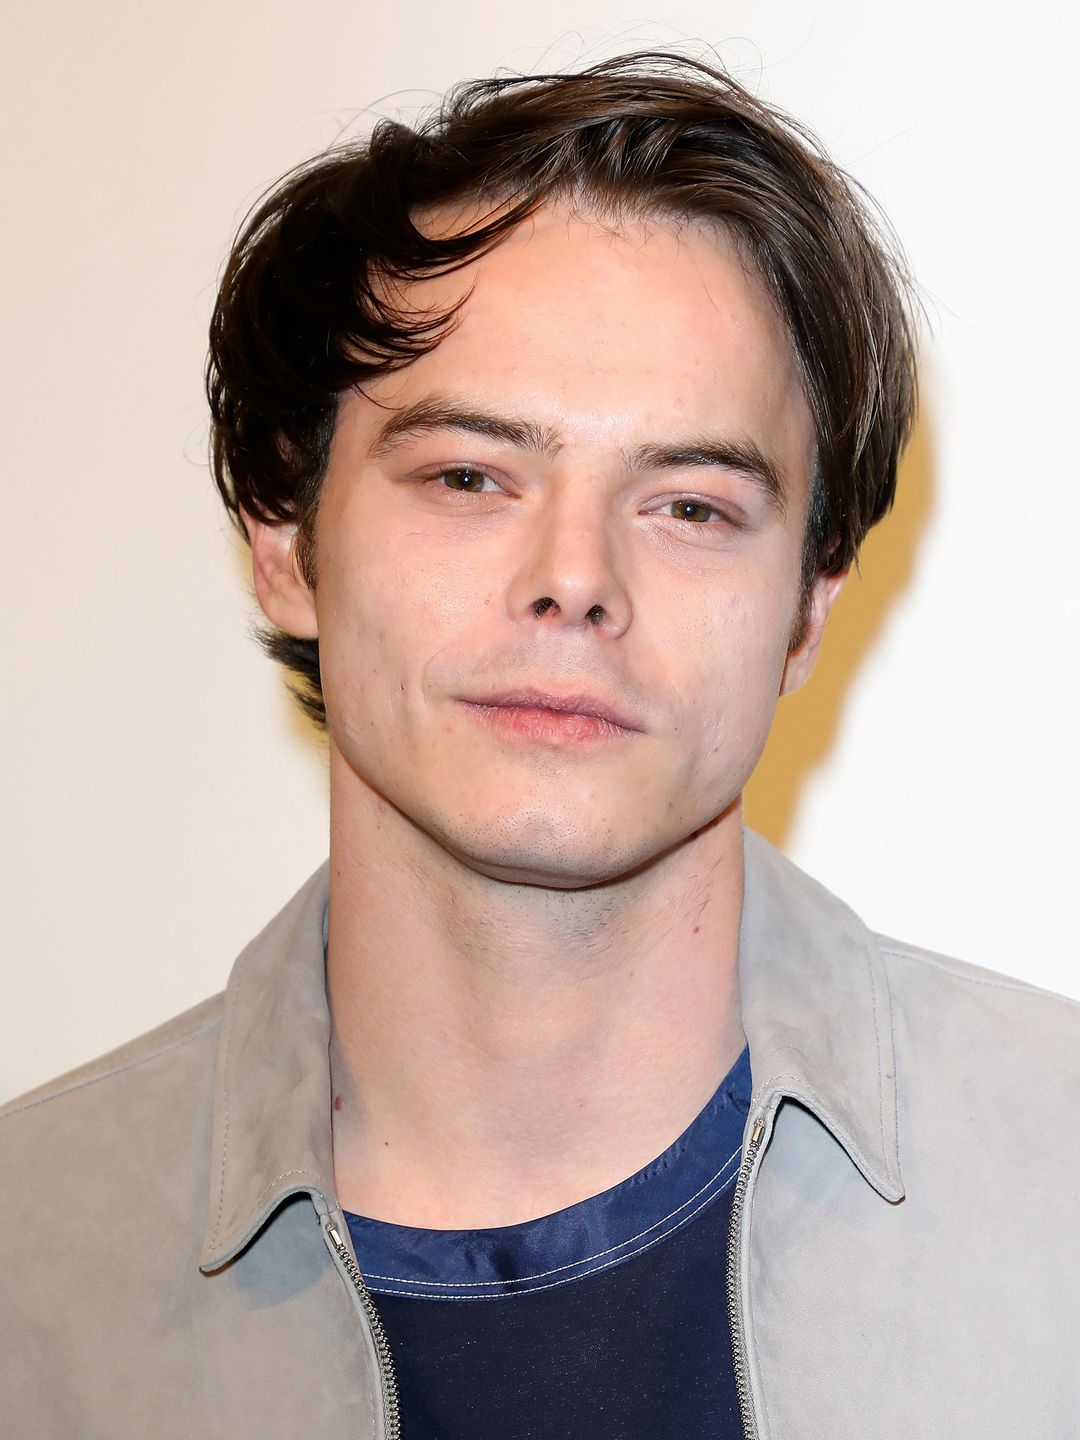 Charlie Heaton who is his father